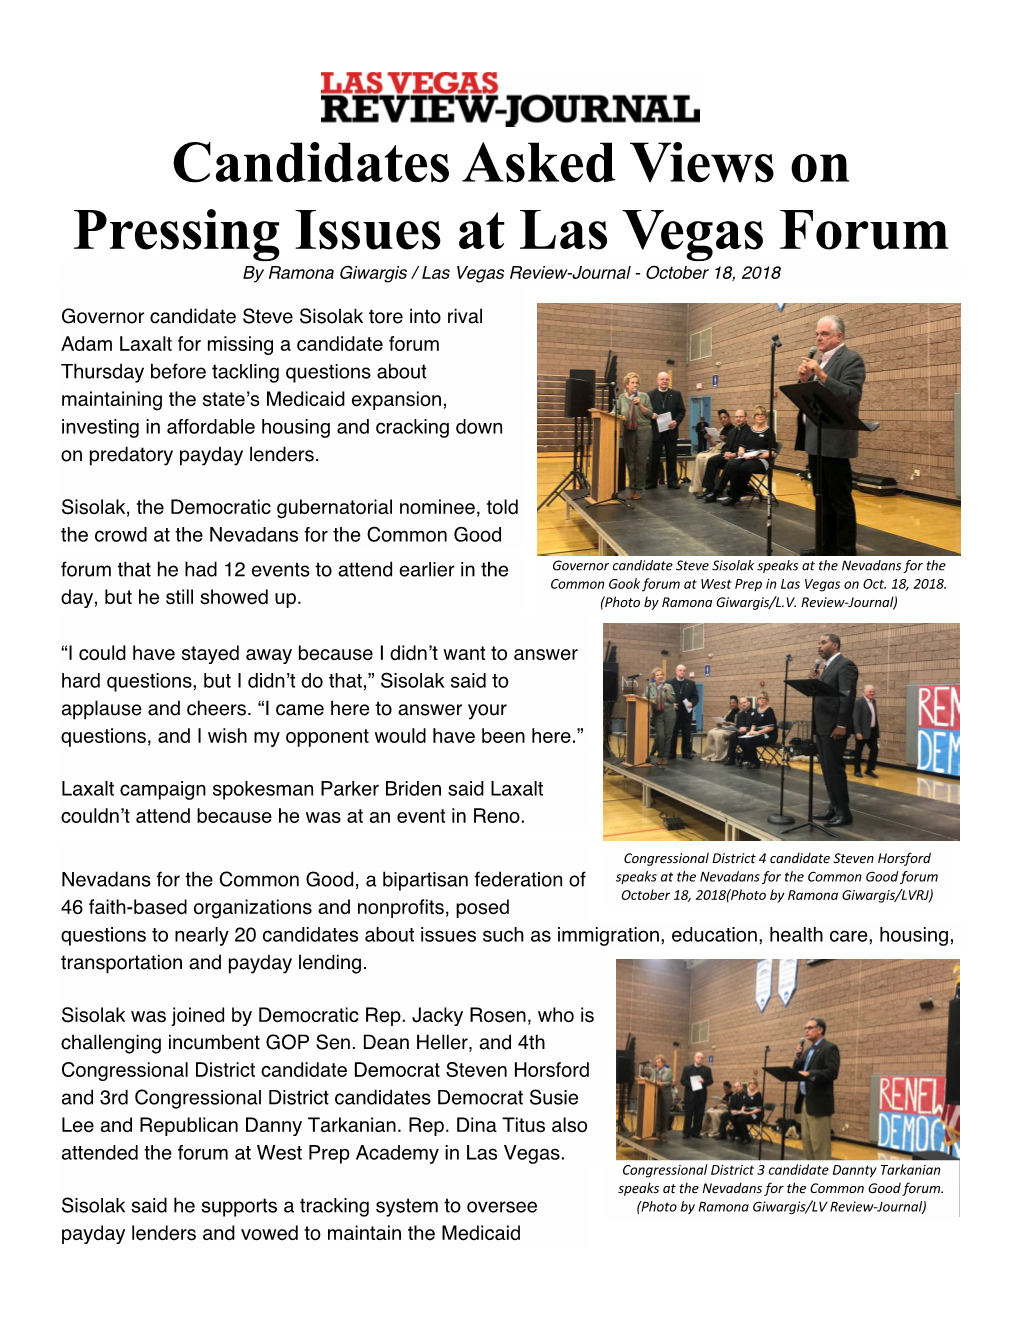 Candidates Asked Views on Pressing Issues at Las Vegas Forum by Ramona Giwargis / Las Vegas Review-Journal - October 18, 2018